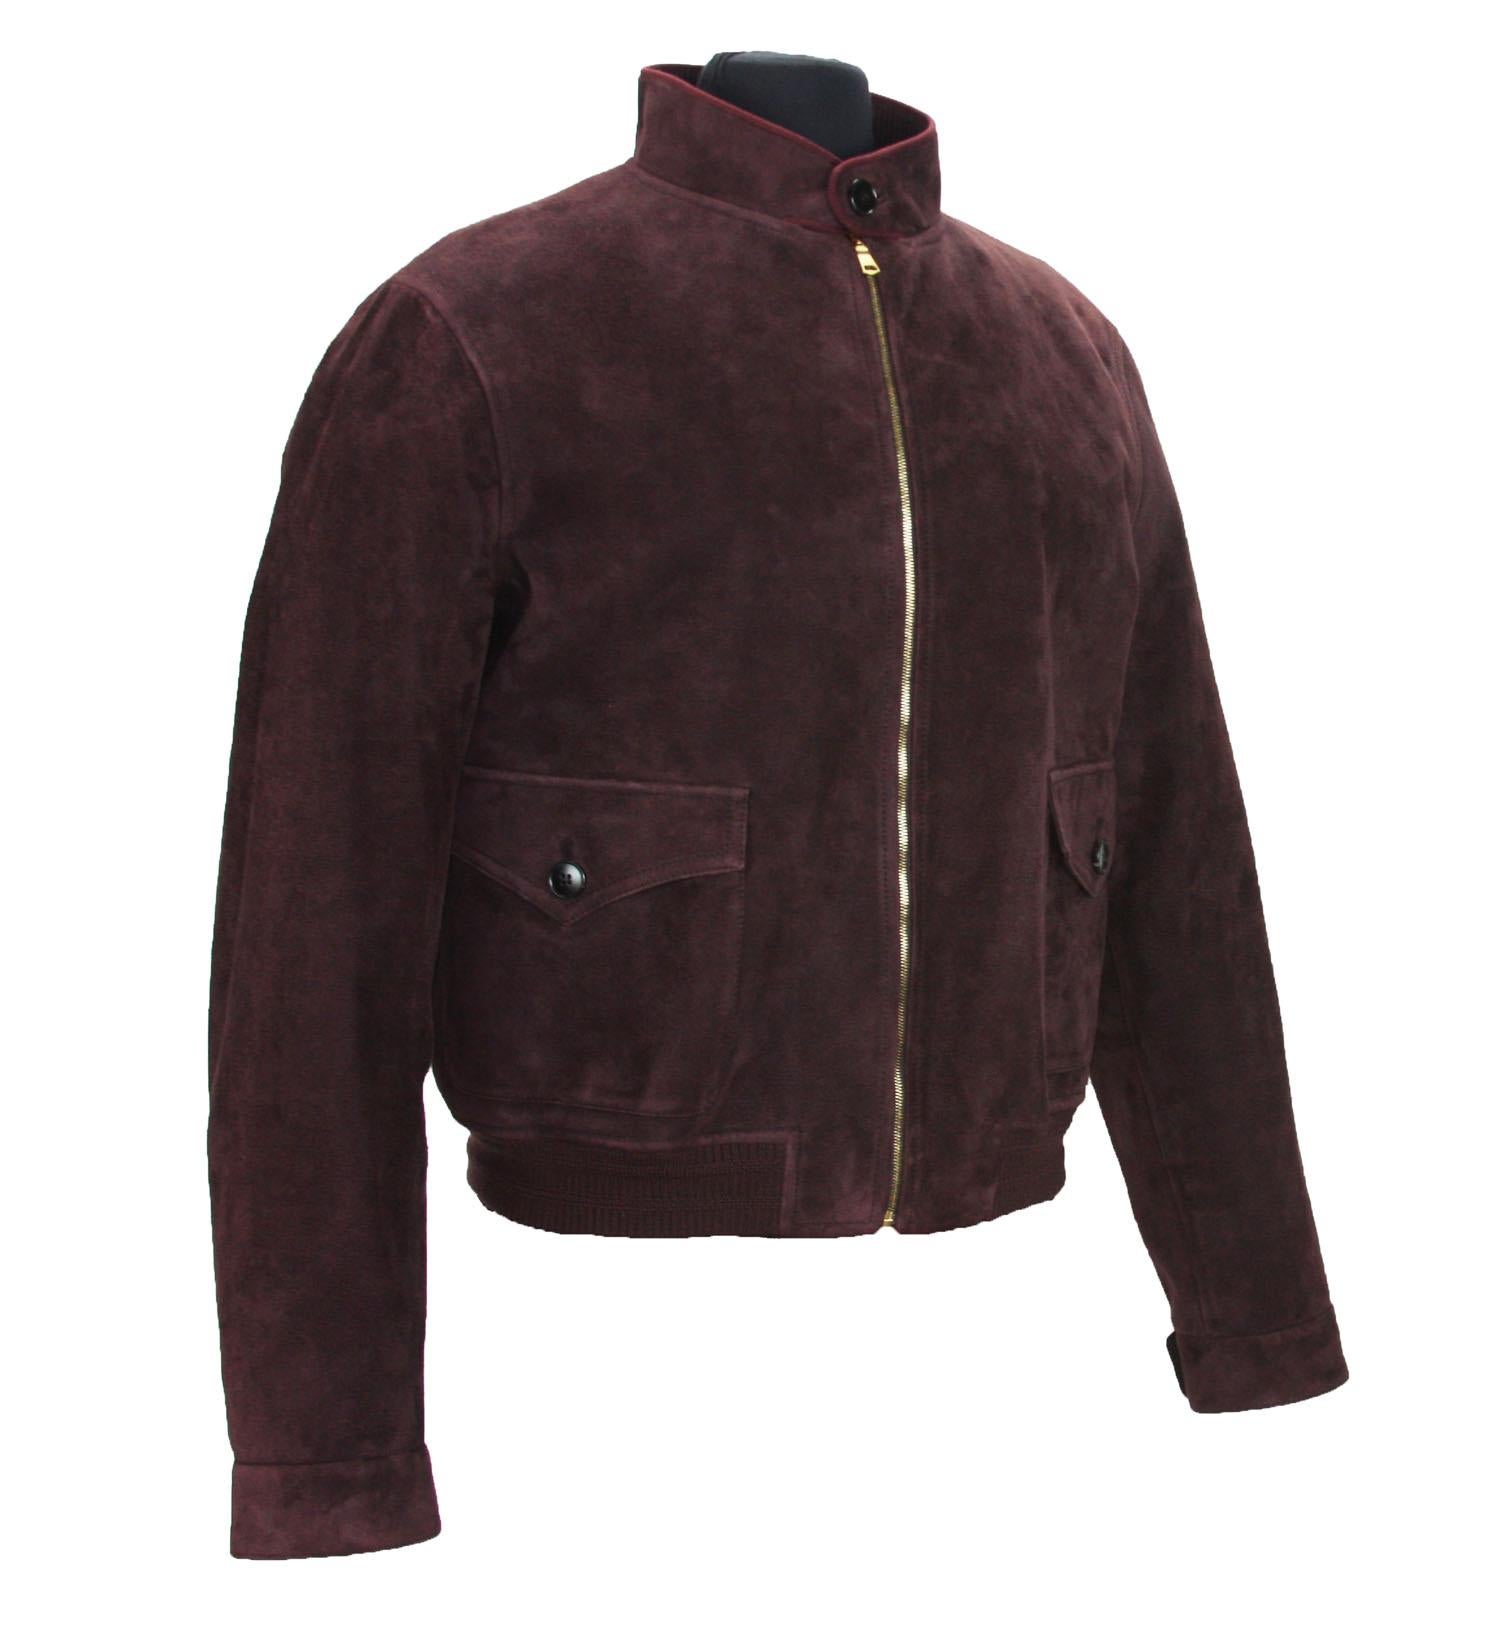 New Gucci Men's Goat Suede Bomber Jacket 
Designer size 54 - US 44
100% Goat Leather, Color - Brown / Plum 
Two Front Deep Pockets, Knit Trim at Hem and Inside Collar, GG Signature Buttons. 
Measurements:  Length - 24 inches, Shoulders - 19.5,